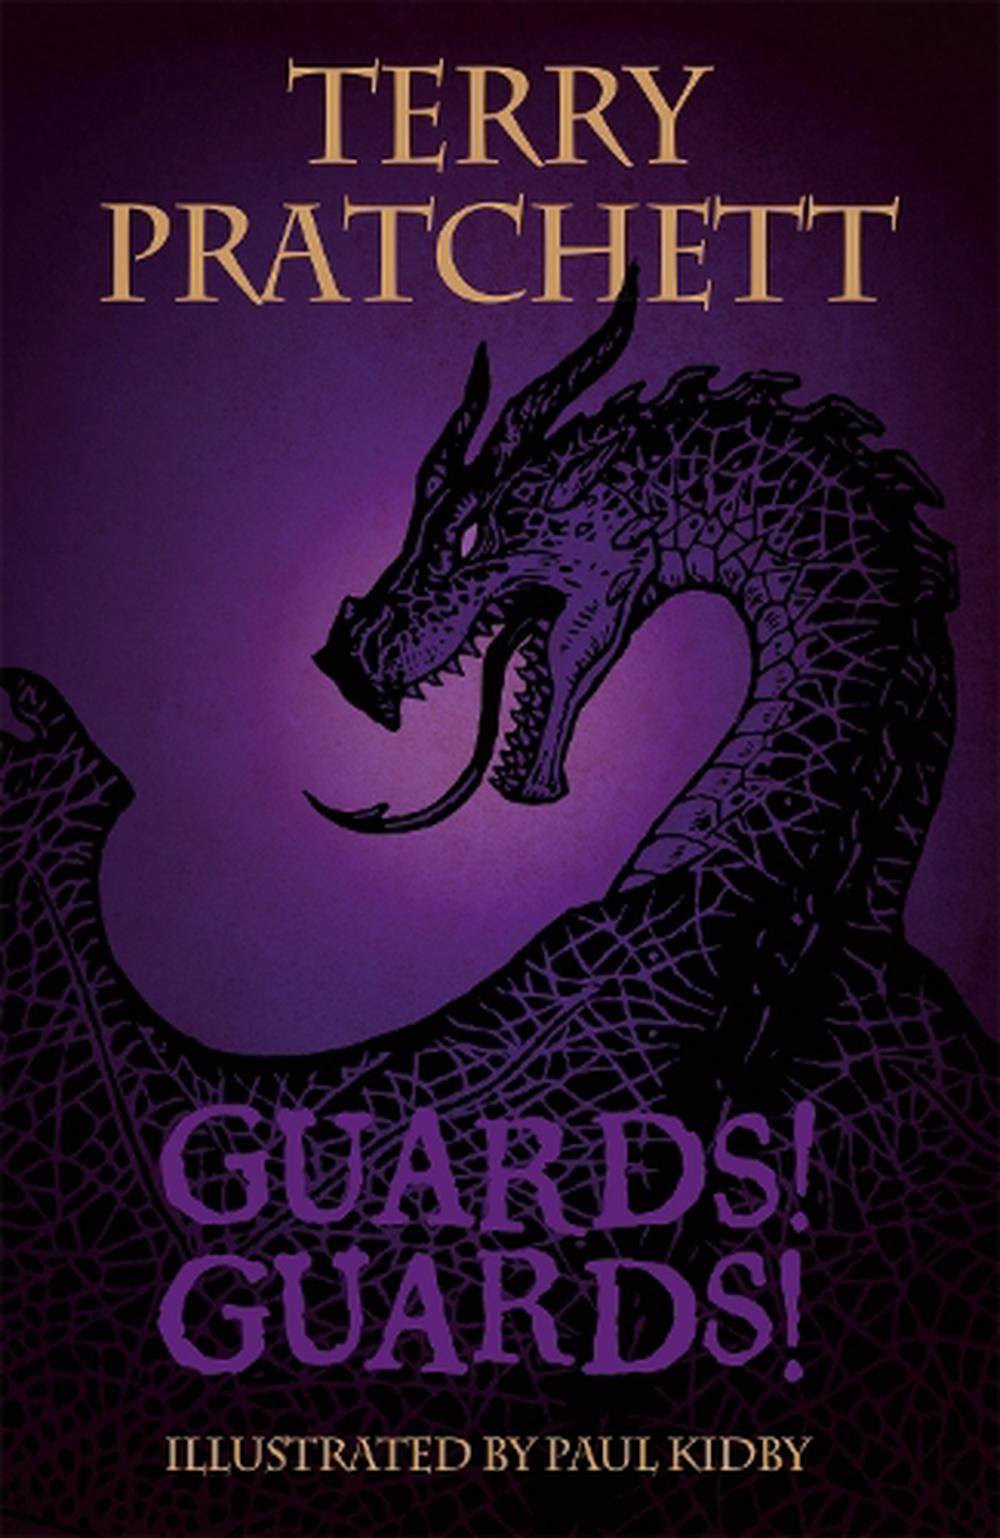 online　The　Terry　Buy　Illustrated　Guards!　Guards!　9781473230712　The　by　Pratchett,　at　Hardcover,　Nile